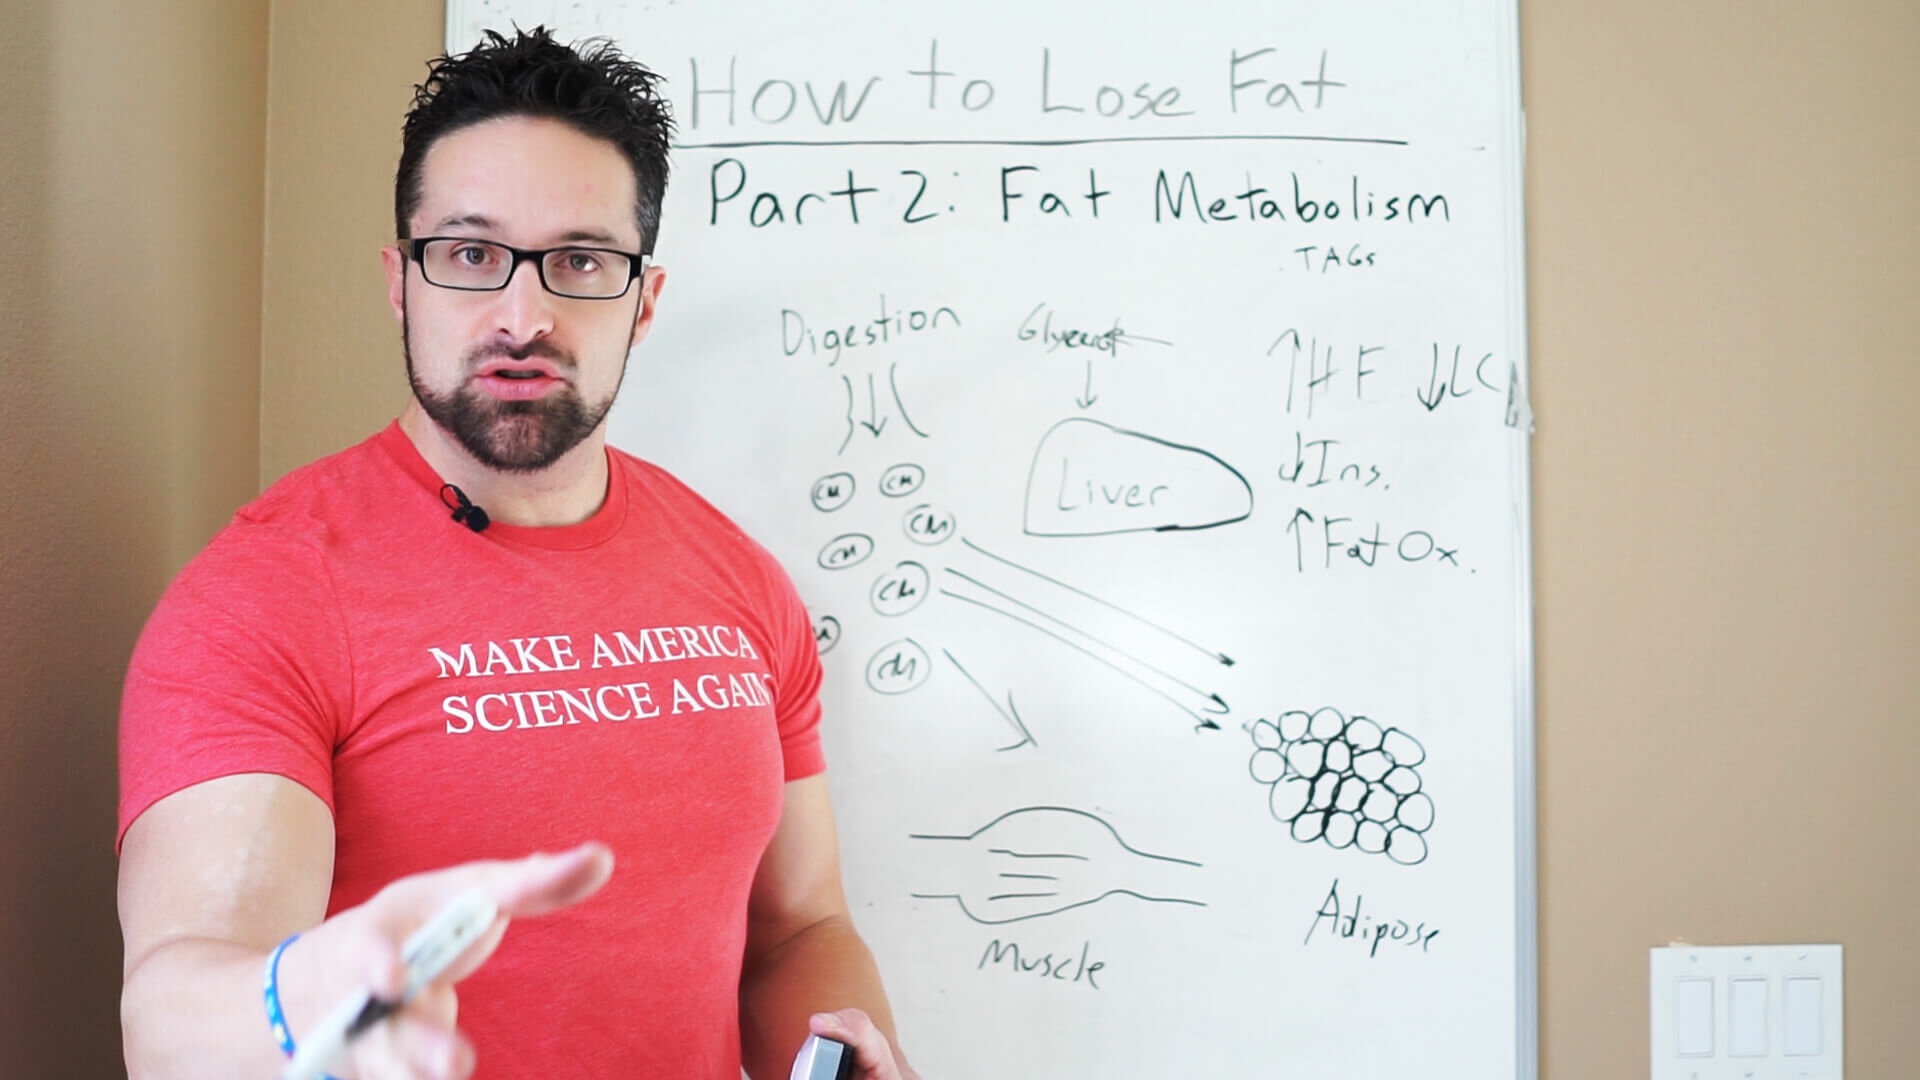 How Fat Loss Works - Part 1: Fat Metabolism